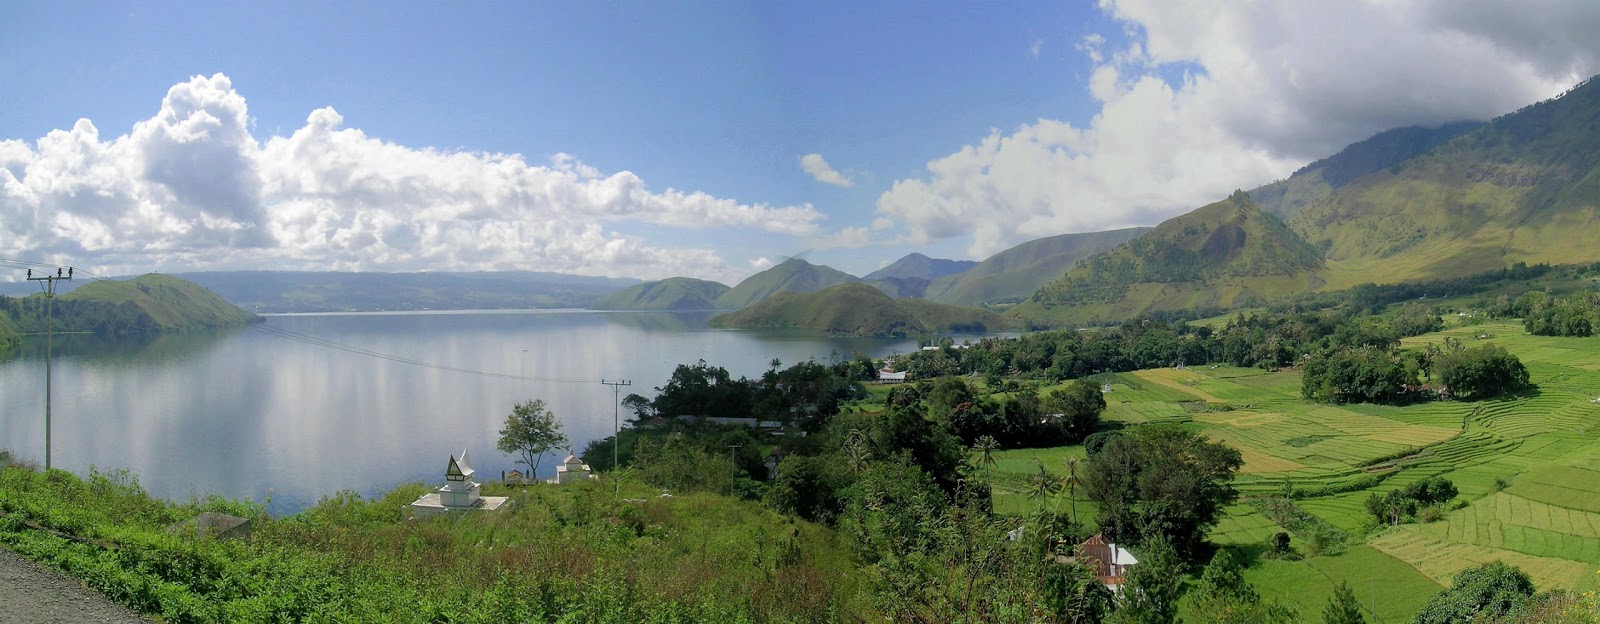 Medan Tour: Planning an Unforgettable Journey to Lake Toba